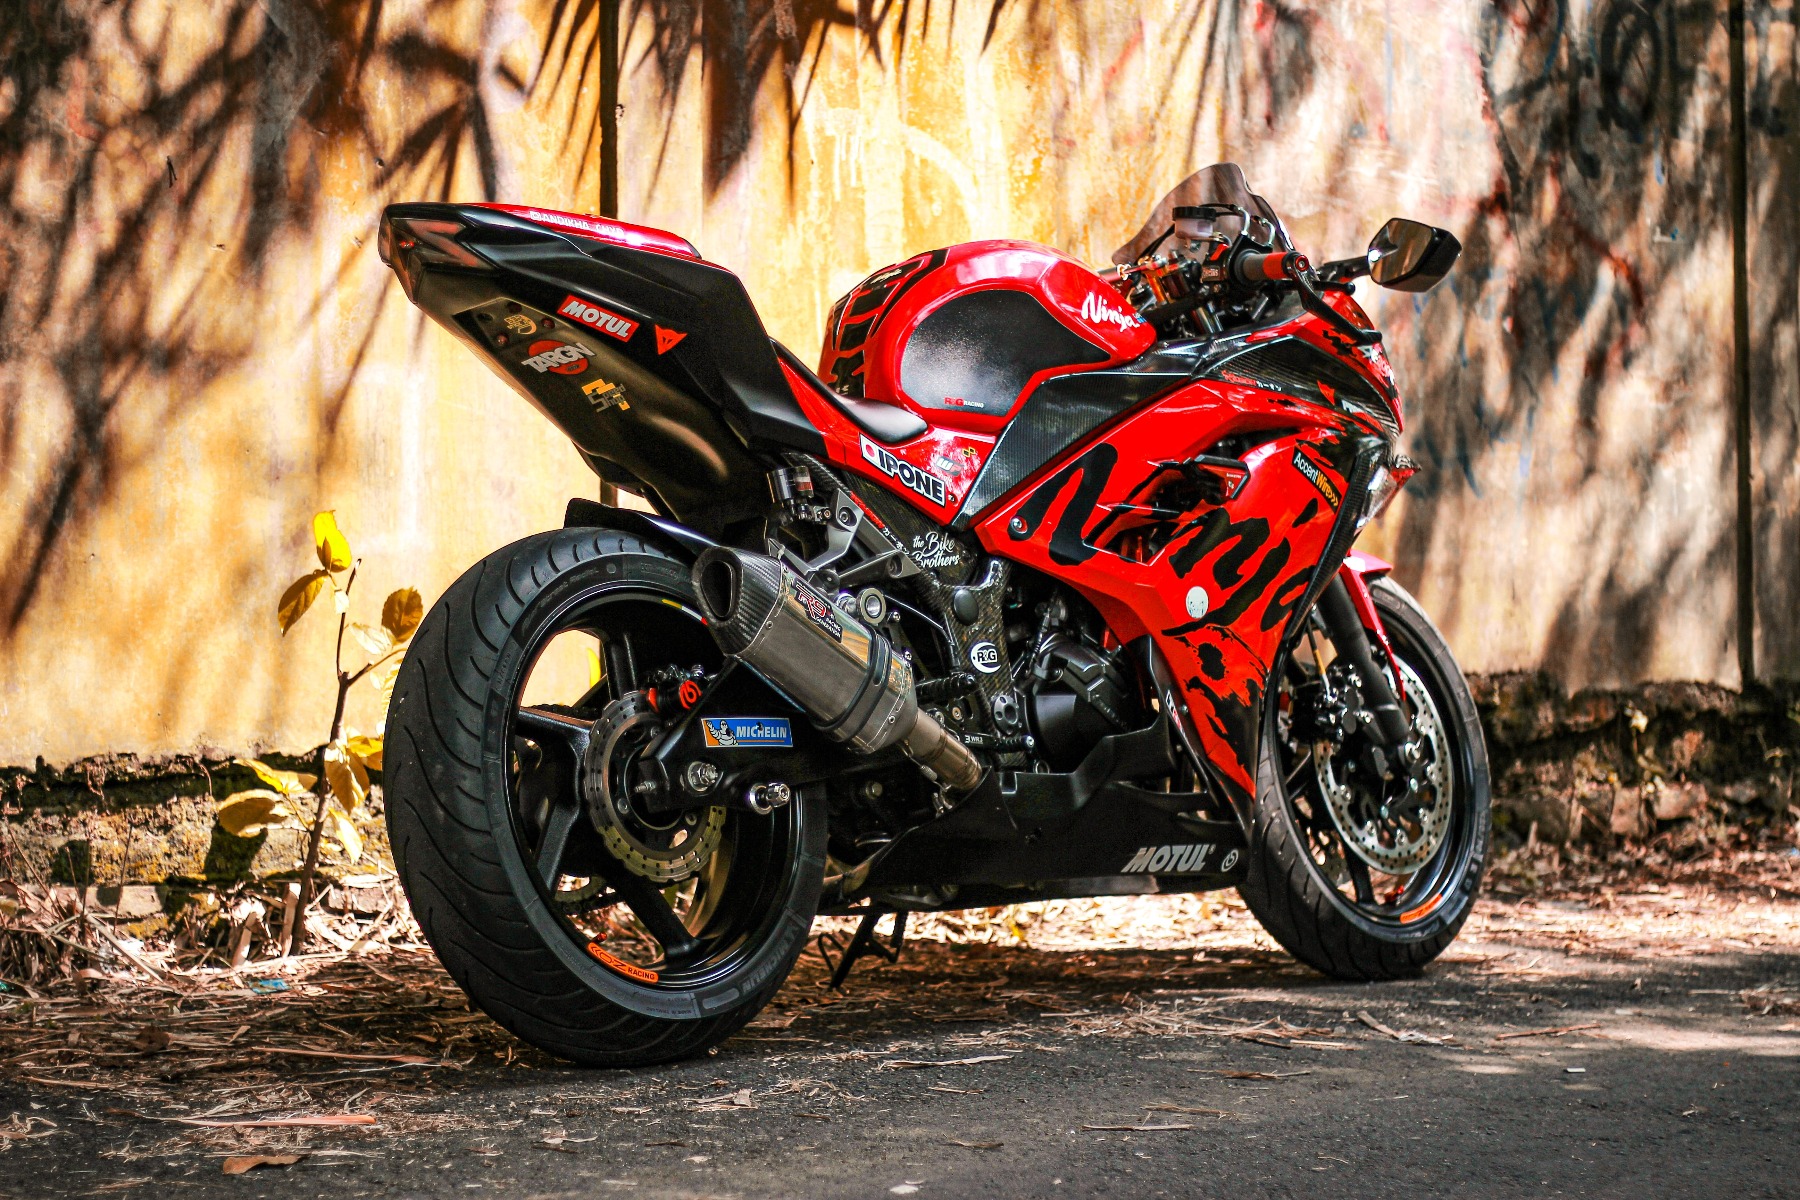 A red and black motorcycle is parked at the side of a building in the sunlight